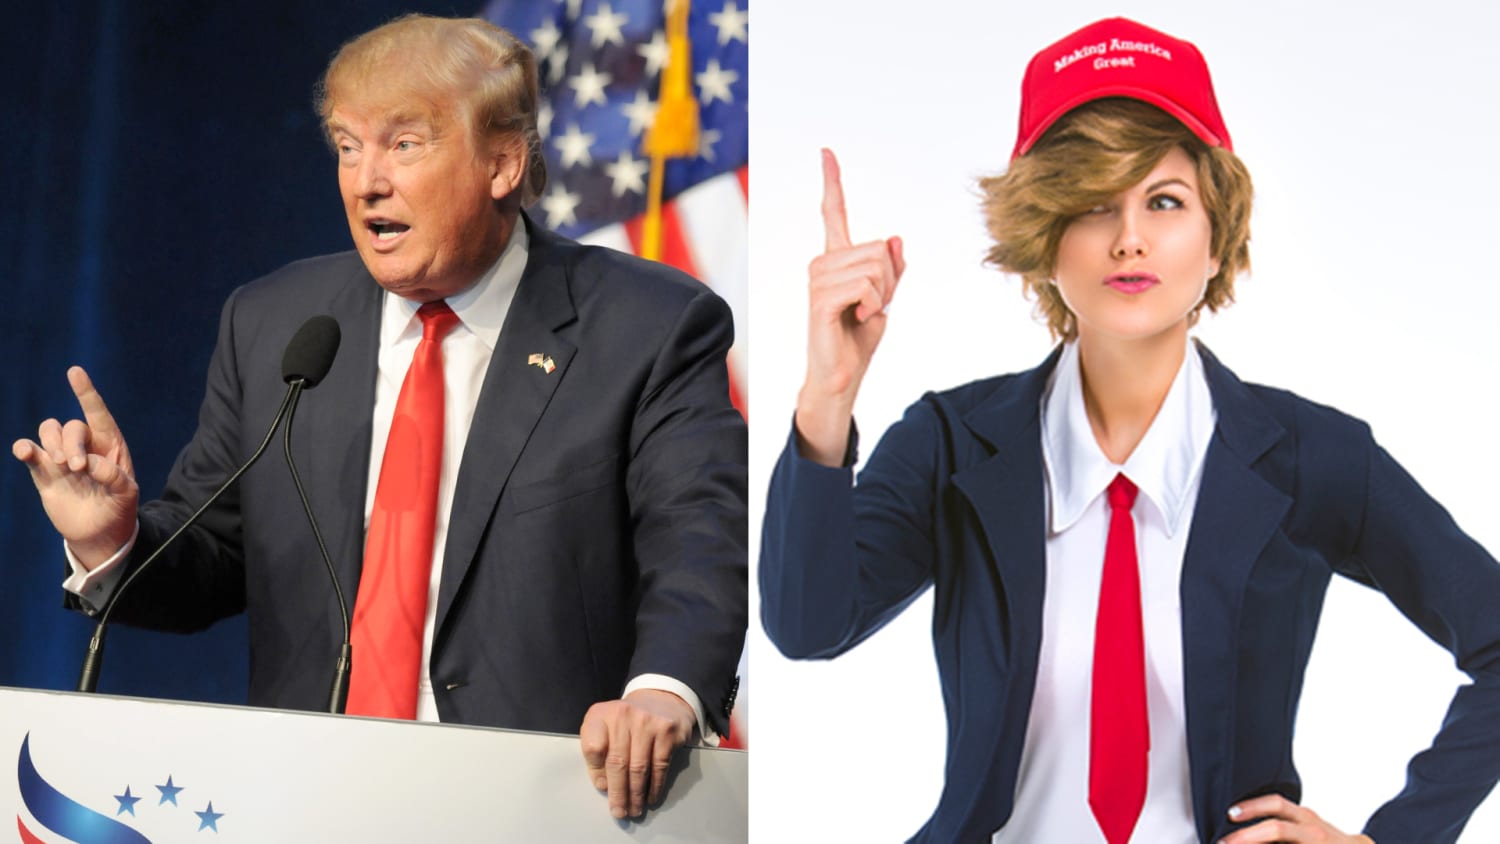 Sexy' Donald Trump: Has the racy Halloween costume trend gone too far?